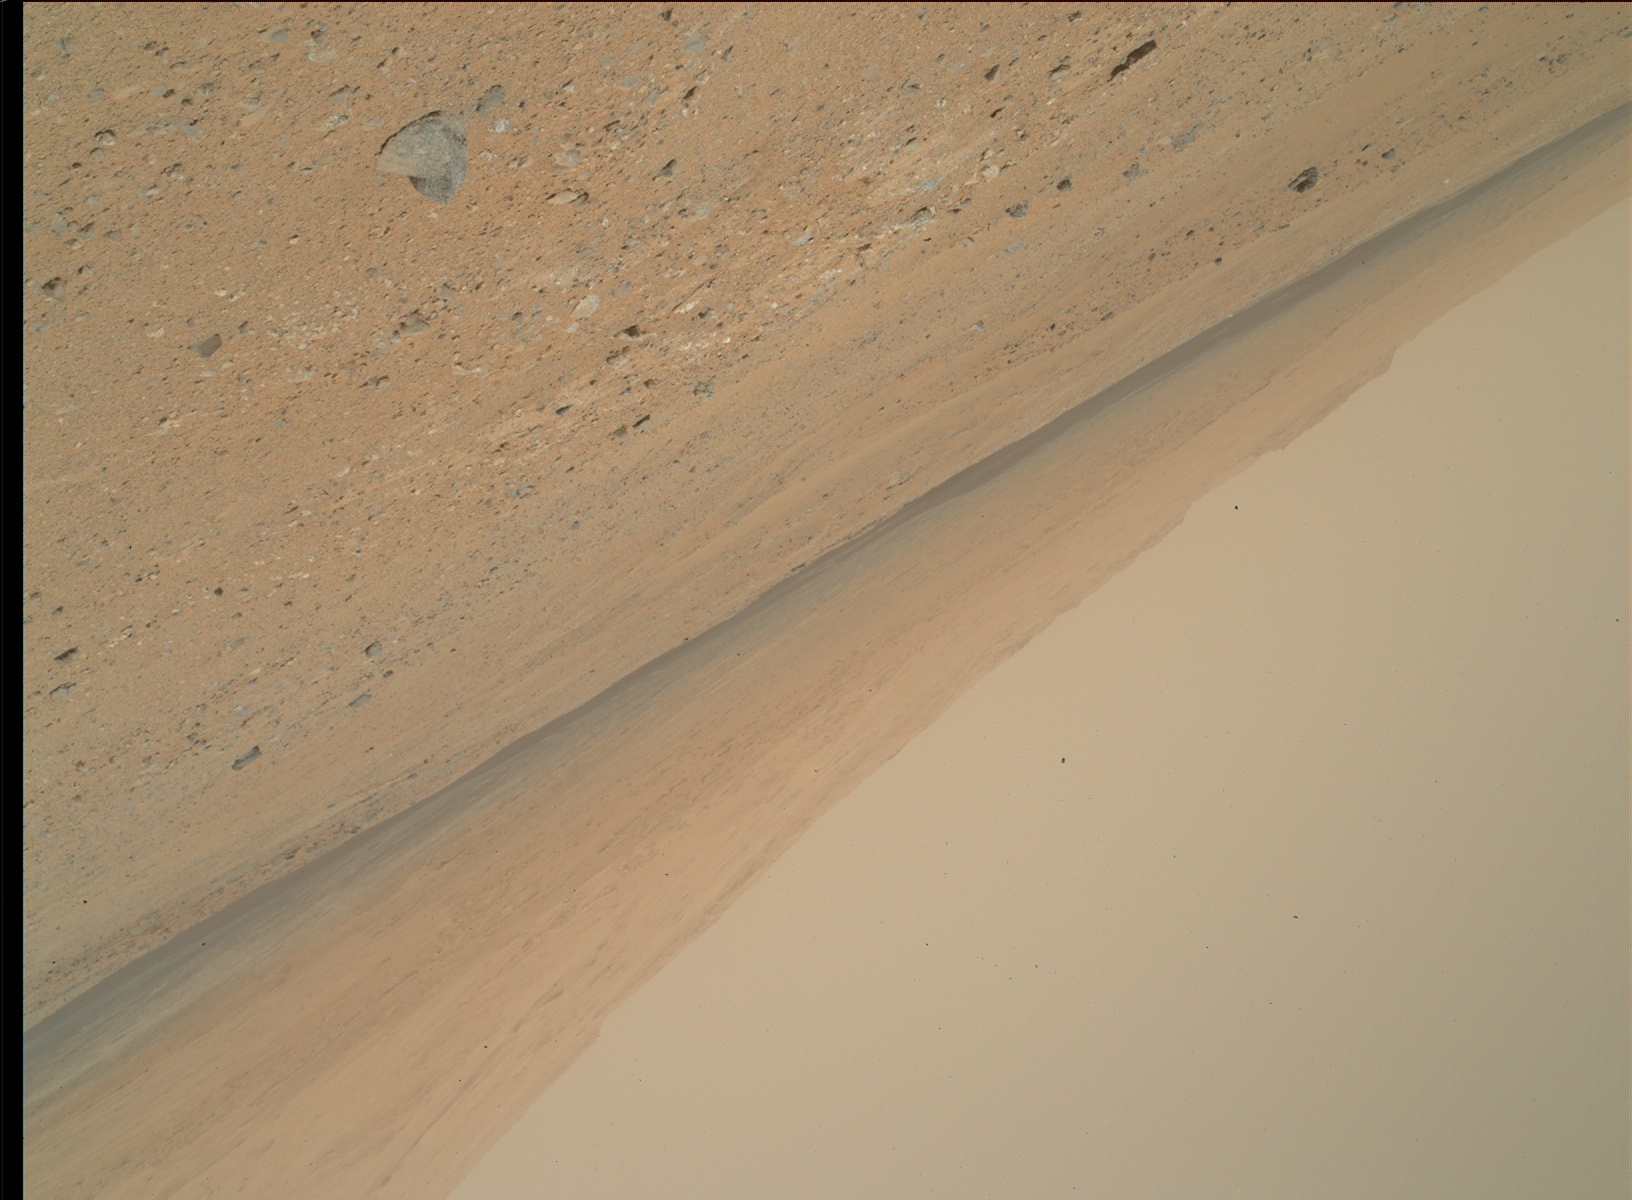 Nasa's Mars rover Curiosity acquired this image using its Mars Hand Lens Imager (MAHLI) on Sol 349